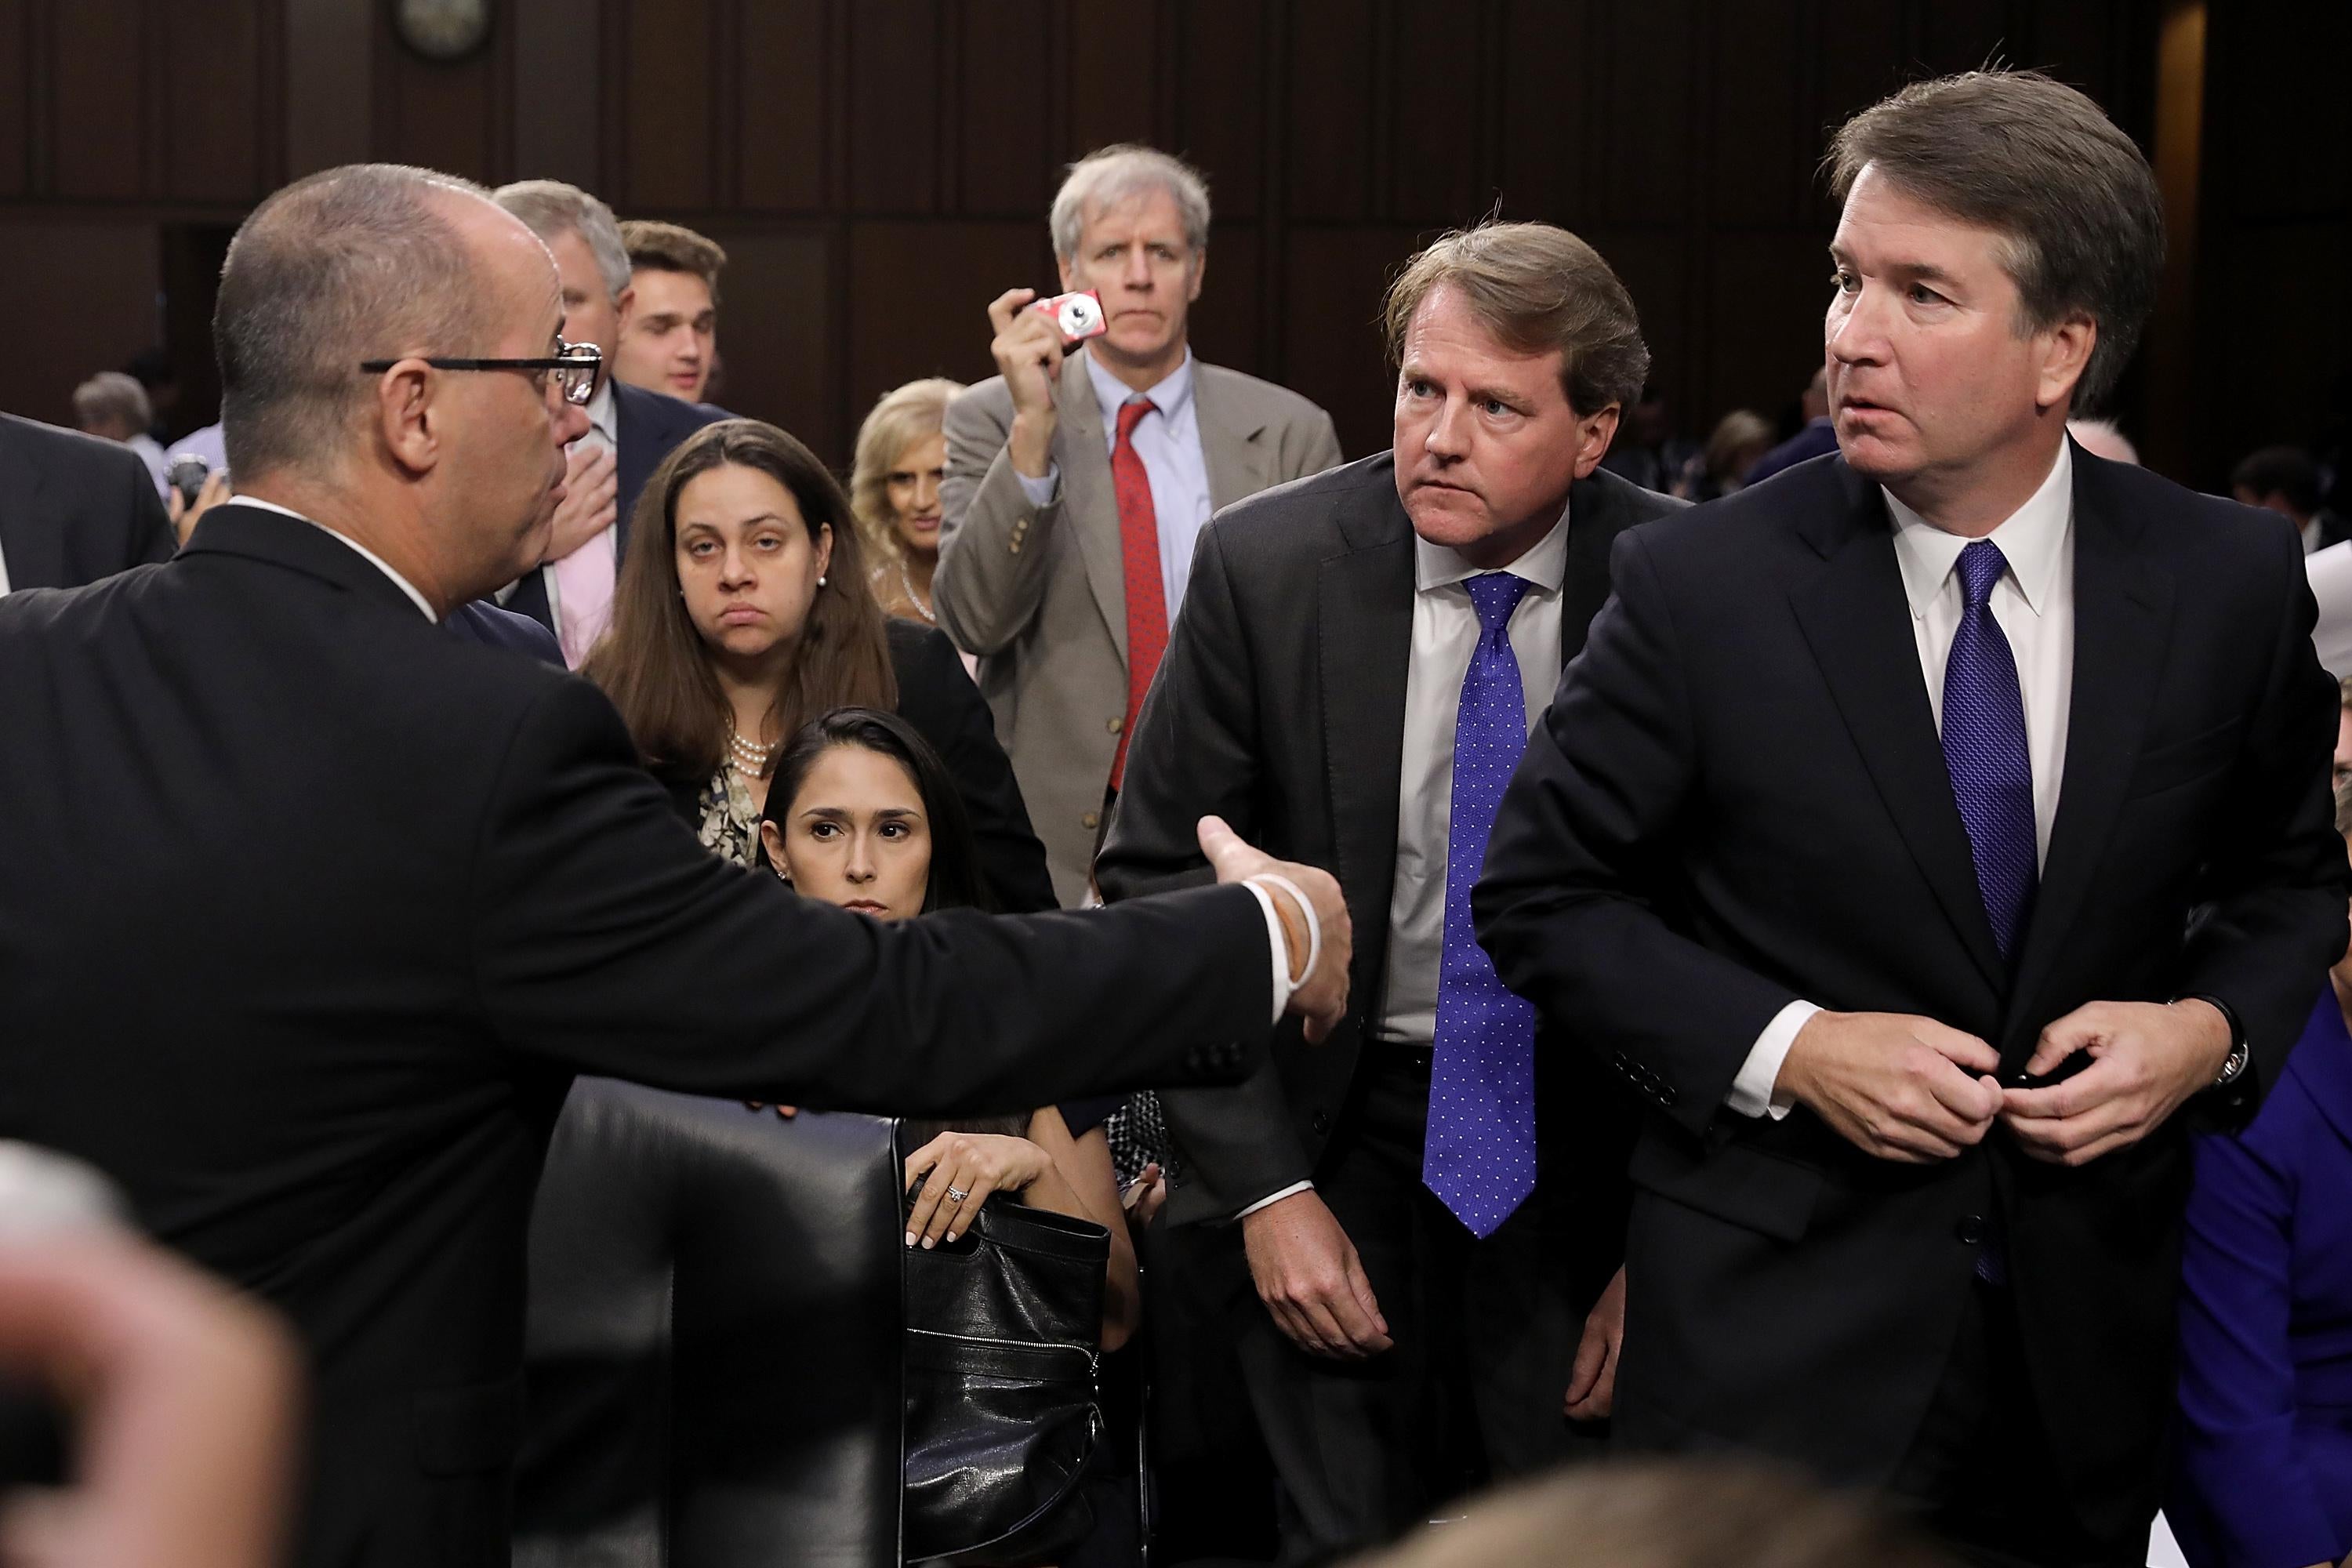 Fred Guttenberg extends his hand to Supreme Court nominee Brett Kavanaugh, who looks concerned. 